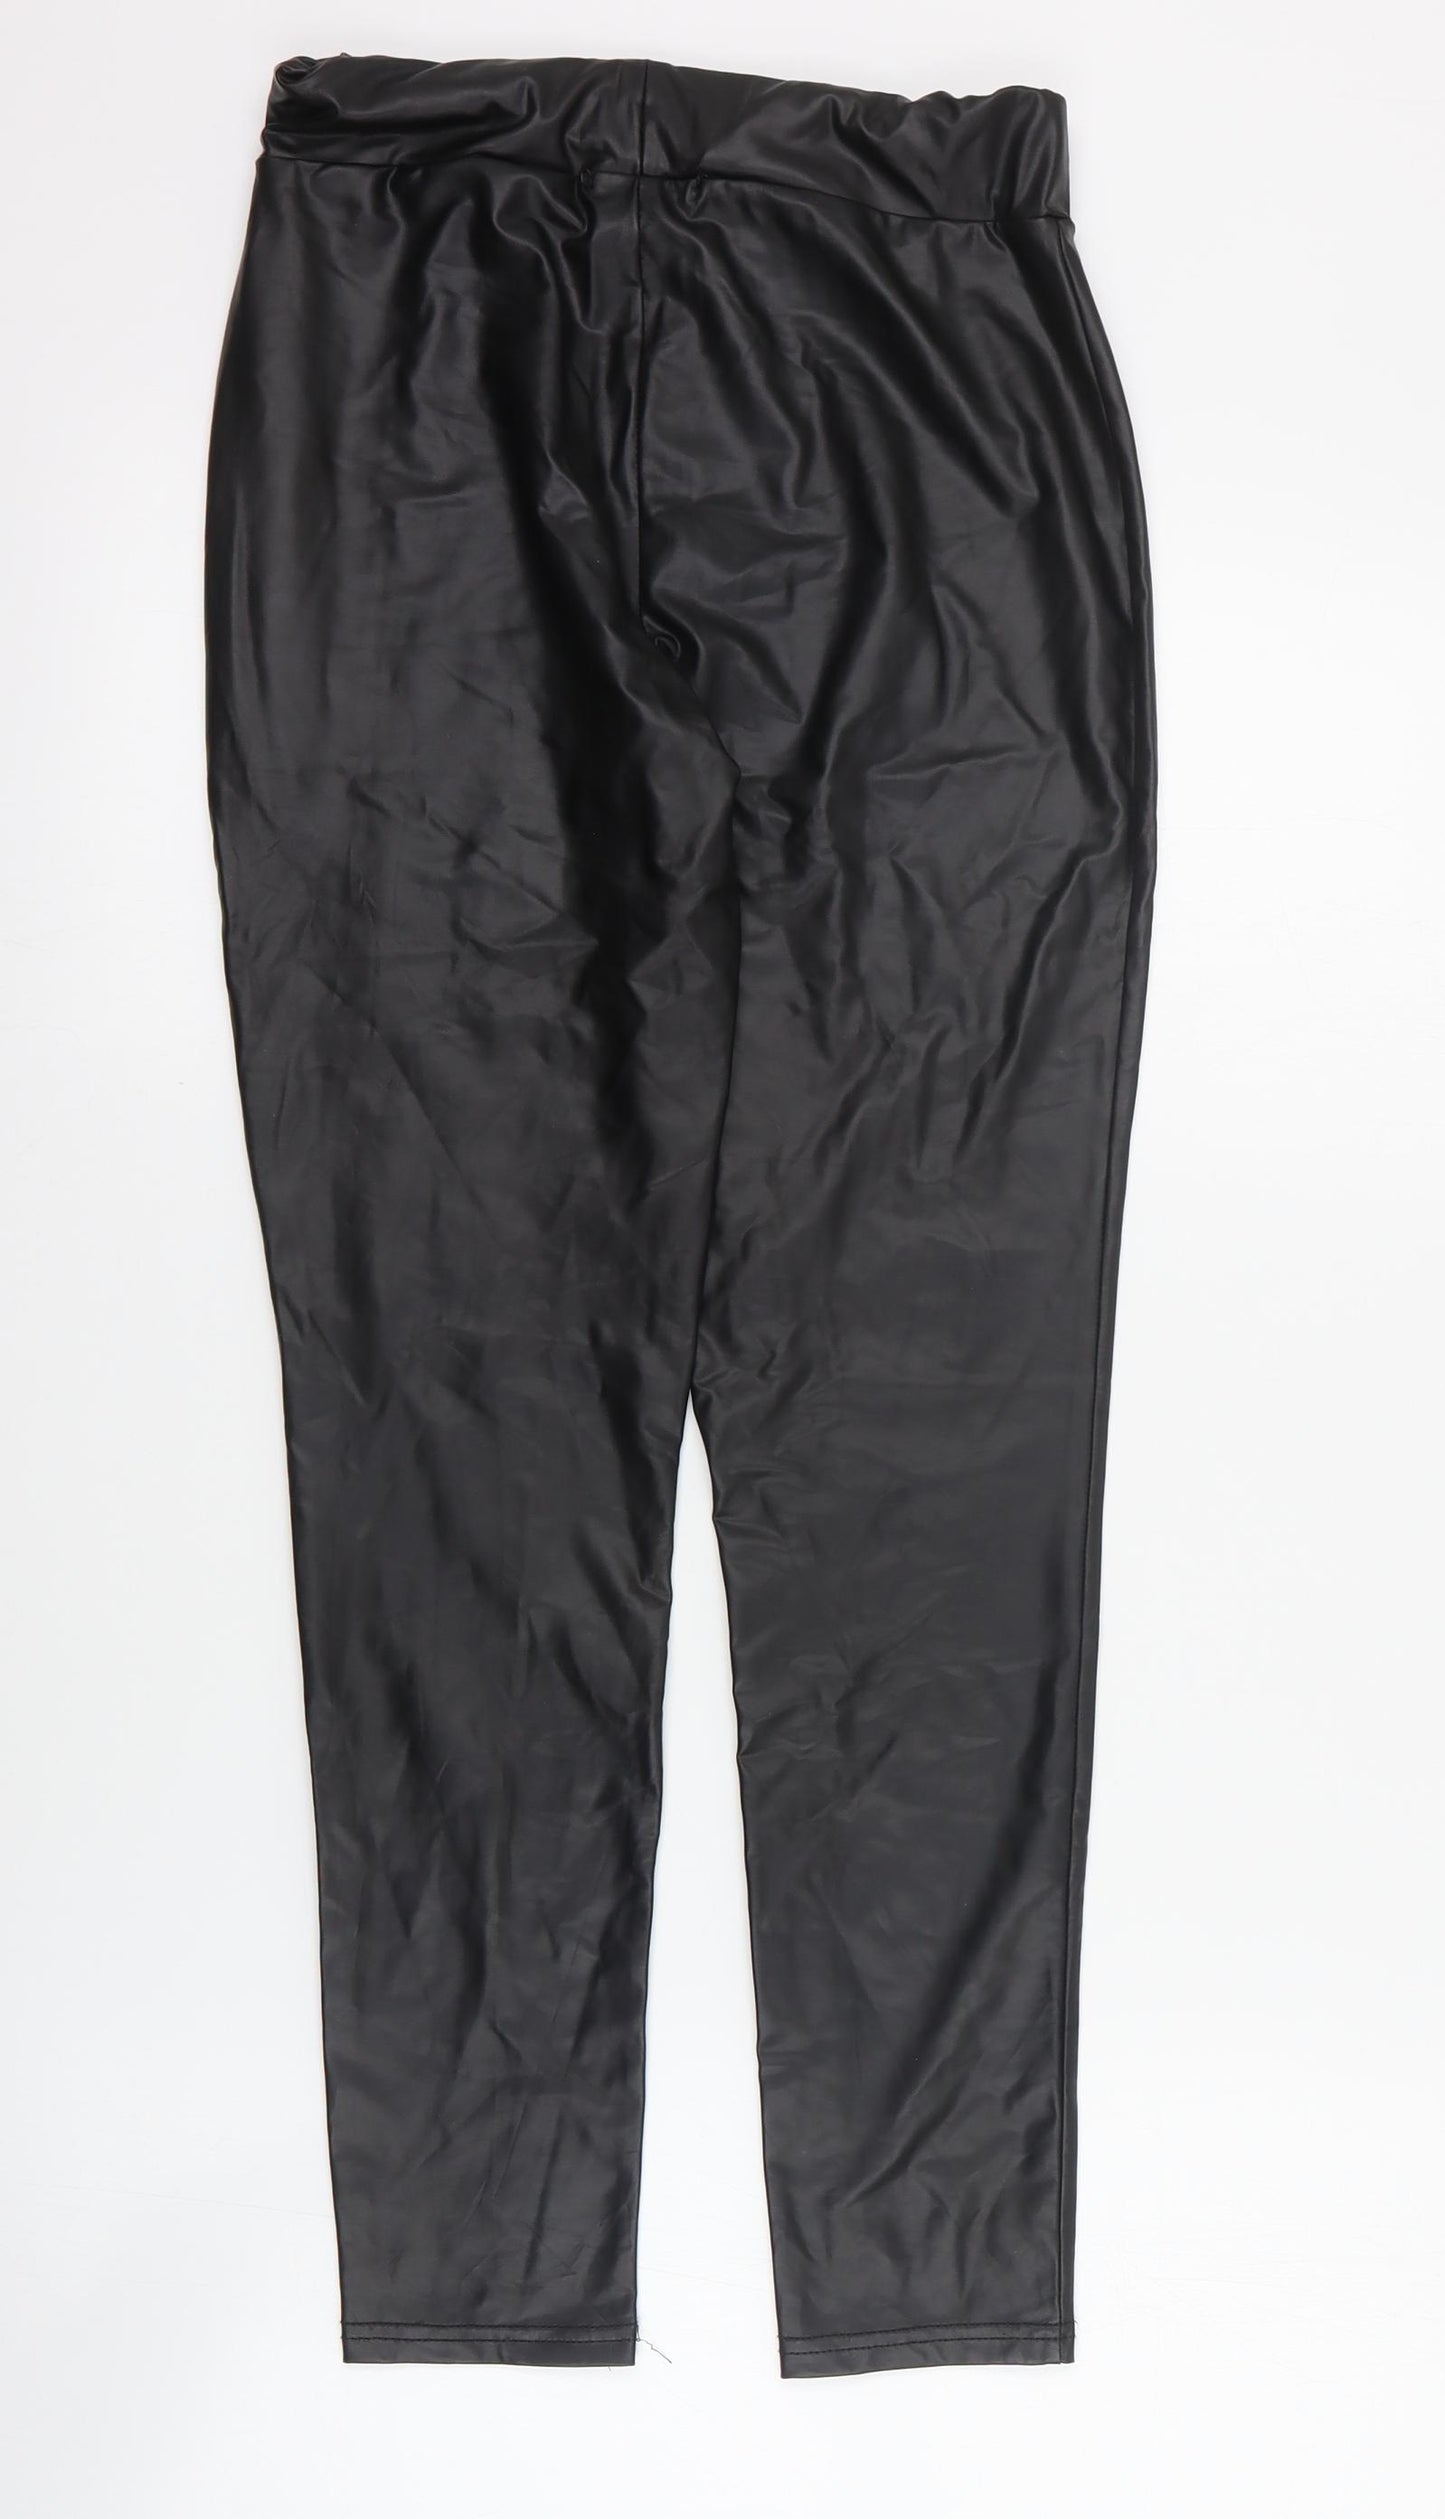 Primark Girls Black  Polyester Cropped Trousers Size 13-14 Years  Regular Pullover - Faux leather